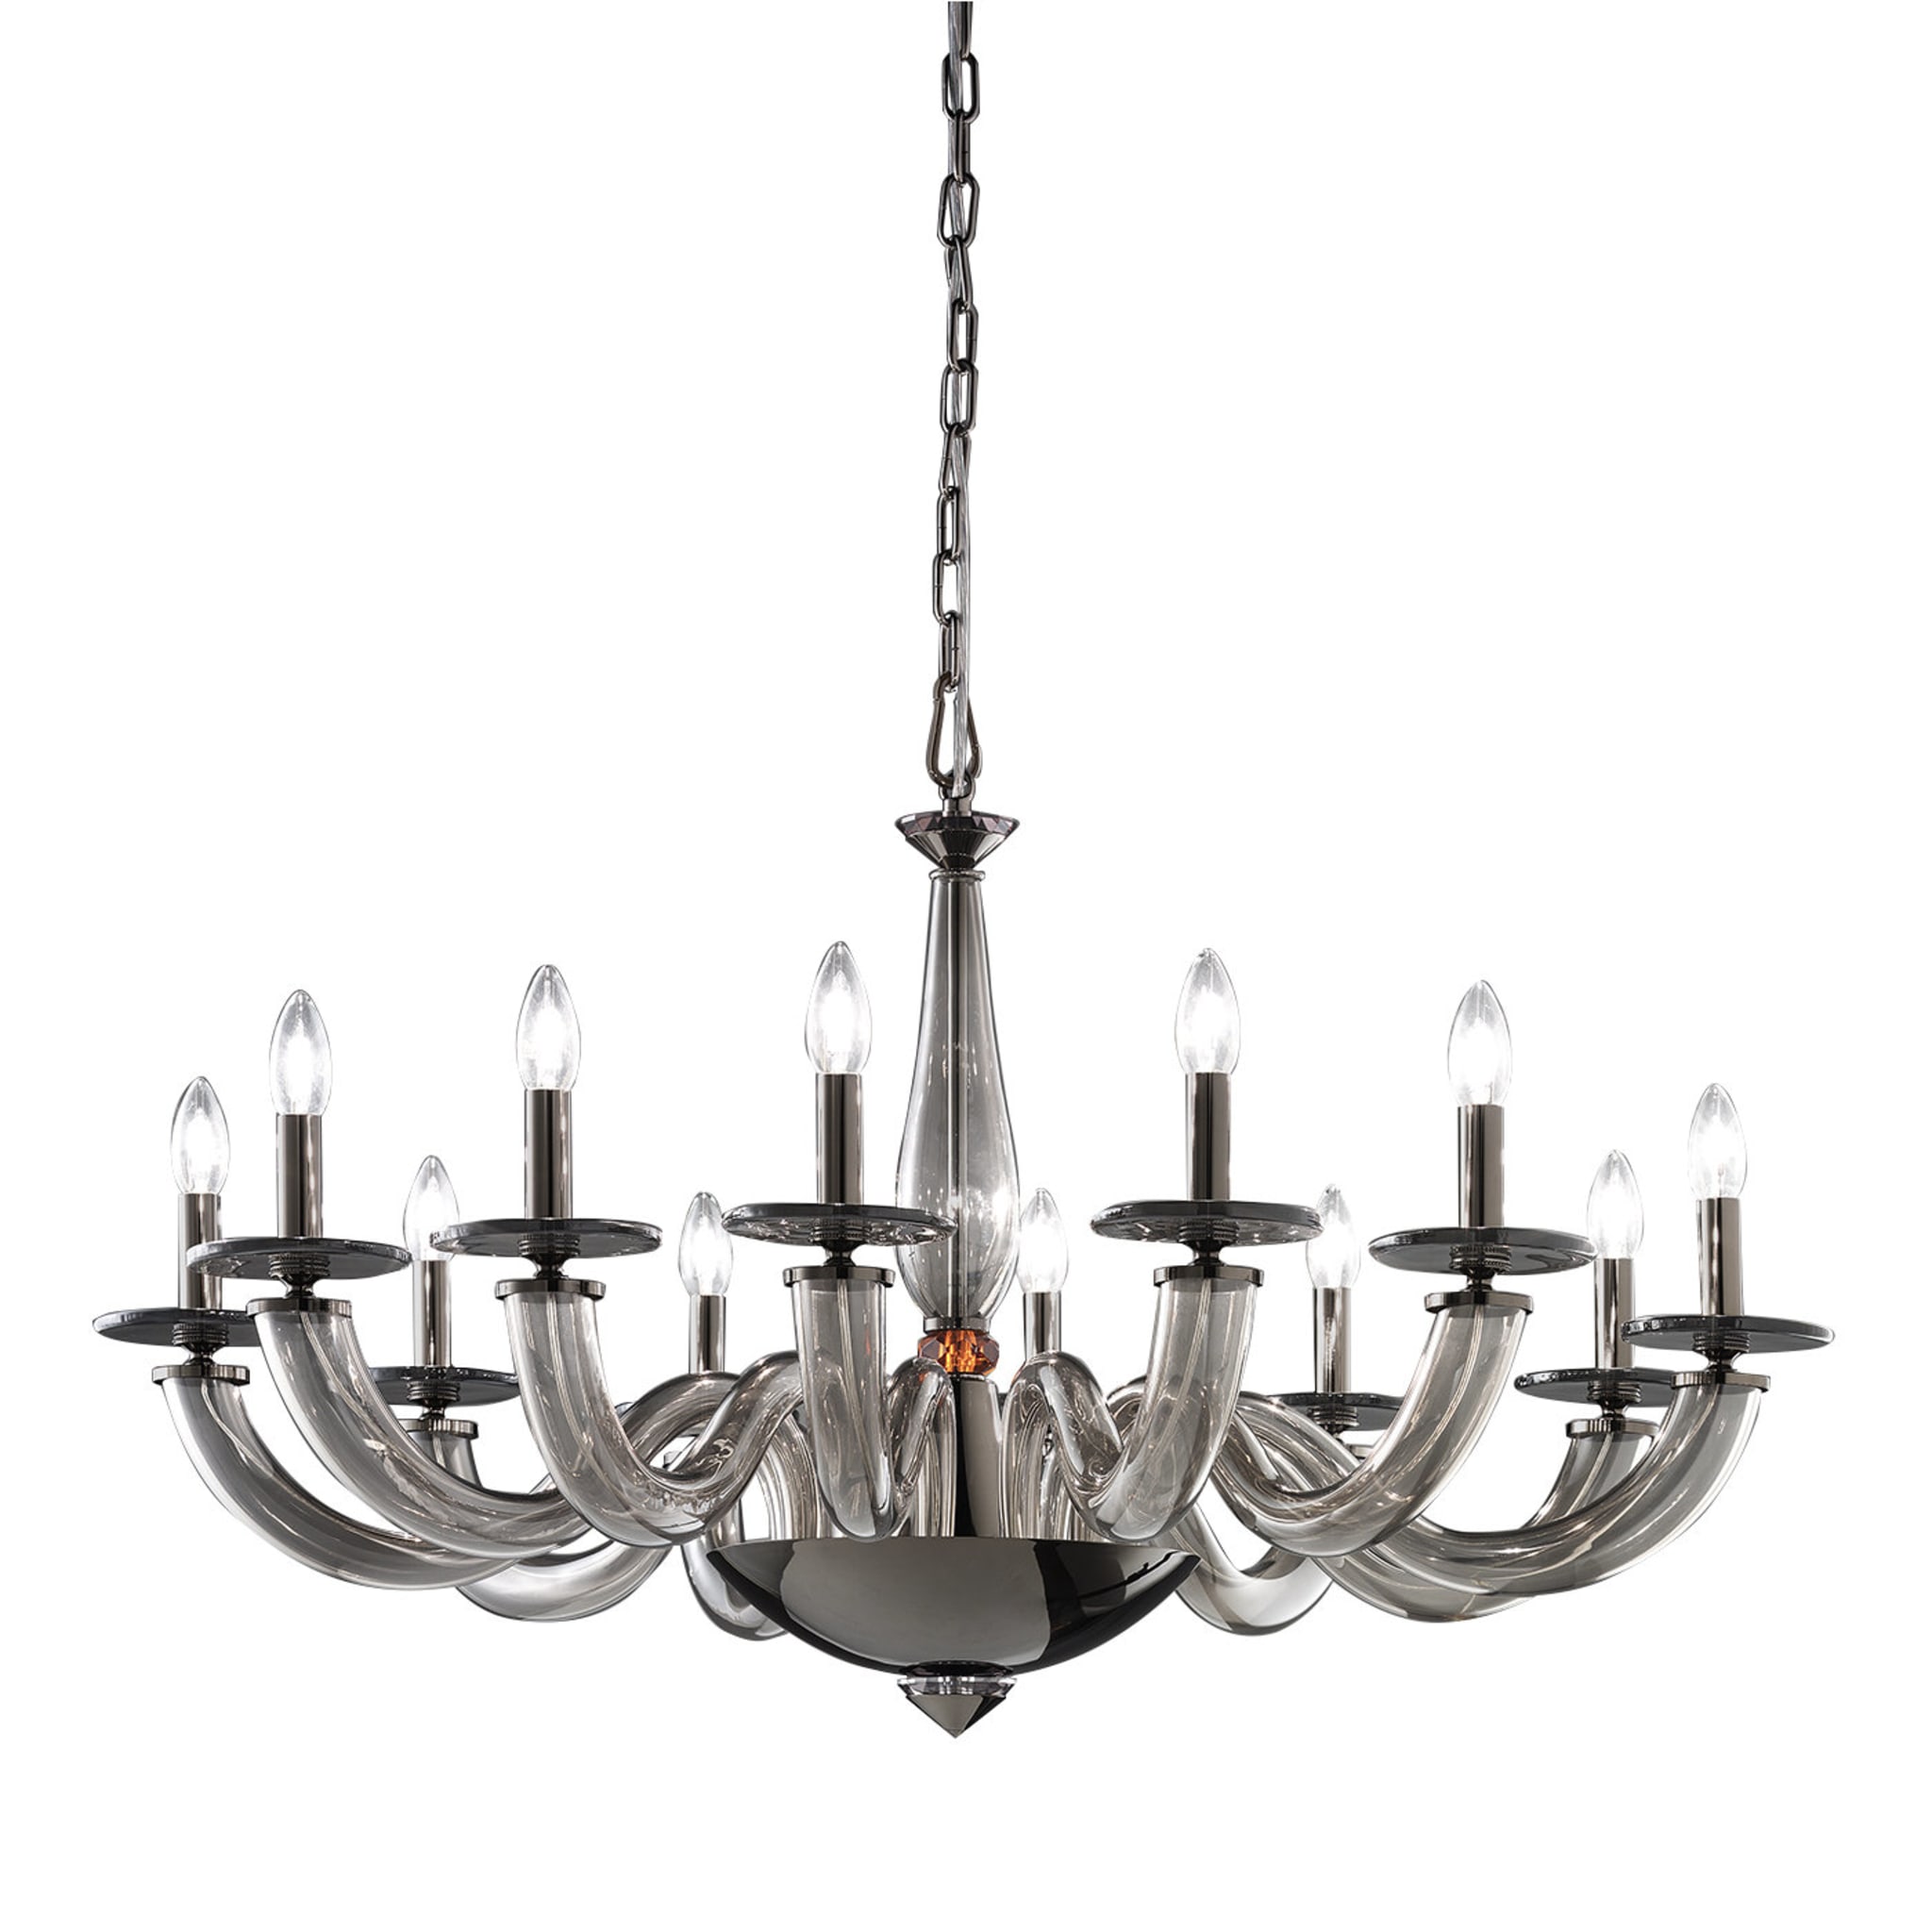 Olympia Gray Chandelier 12 Lights - Main view